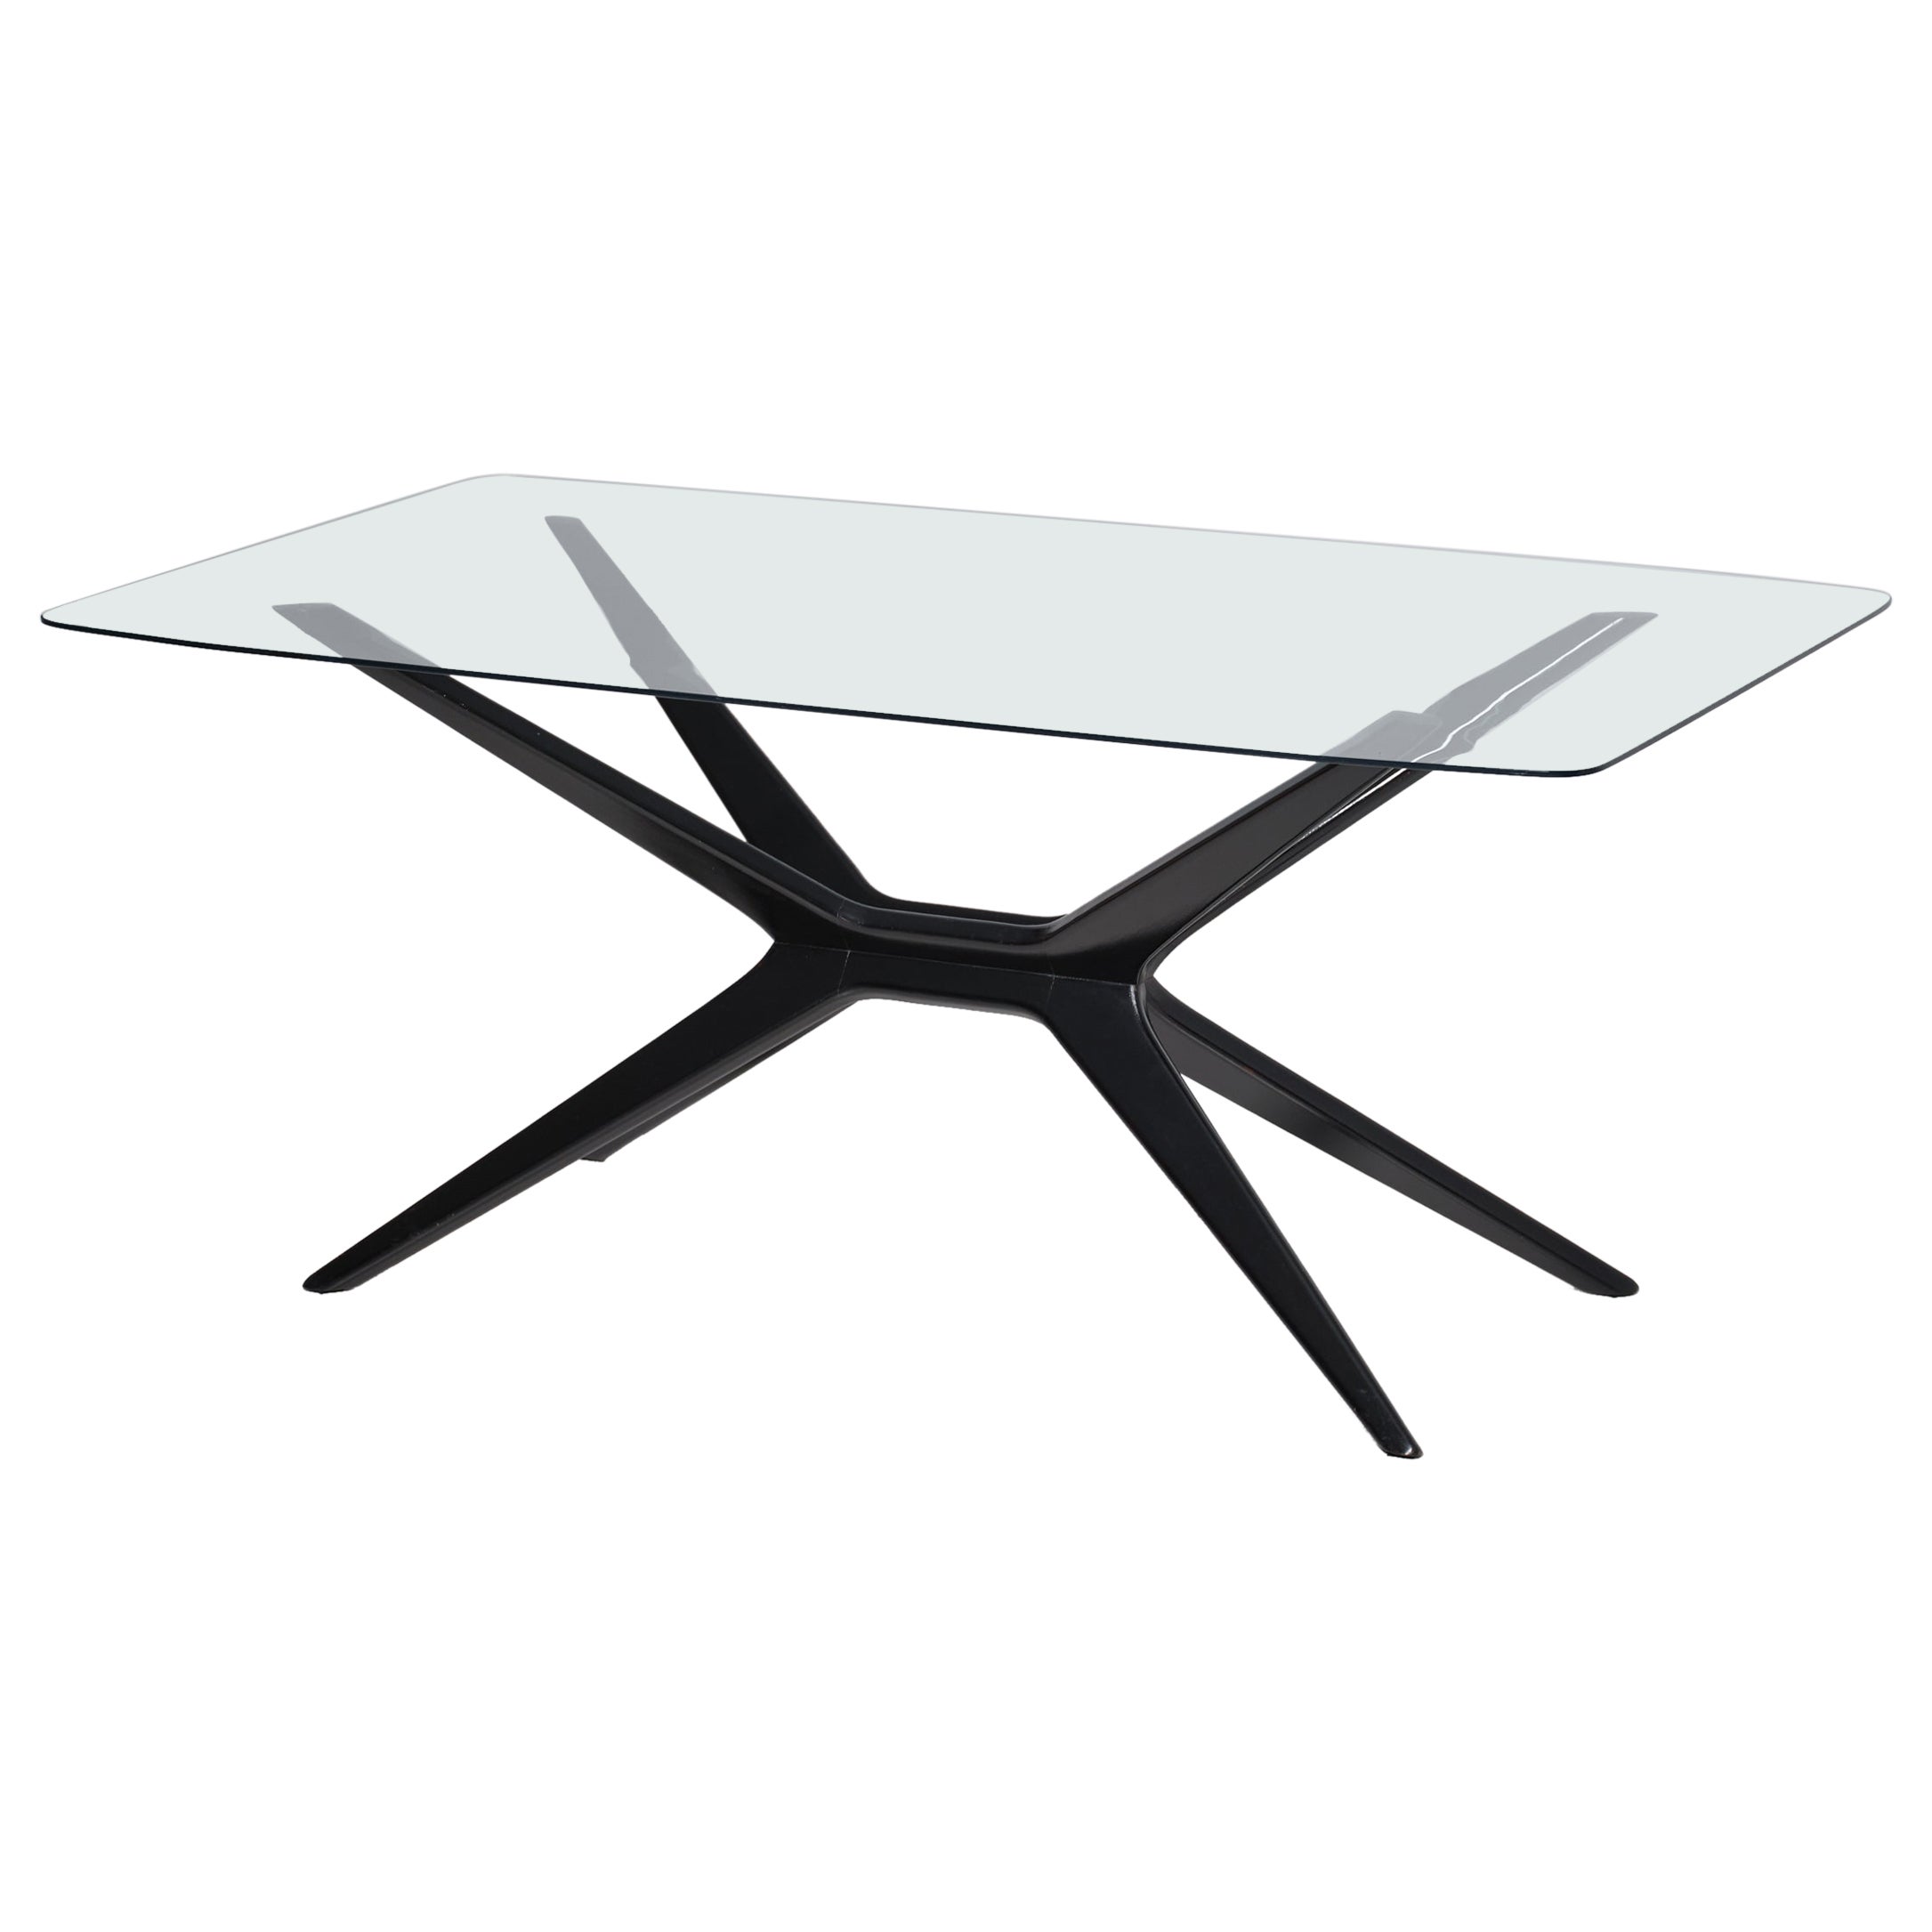 Elegant Coffee Table with Glass Top and Sleek Black Legs For Sale